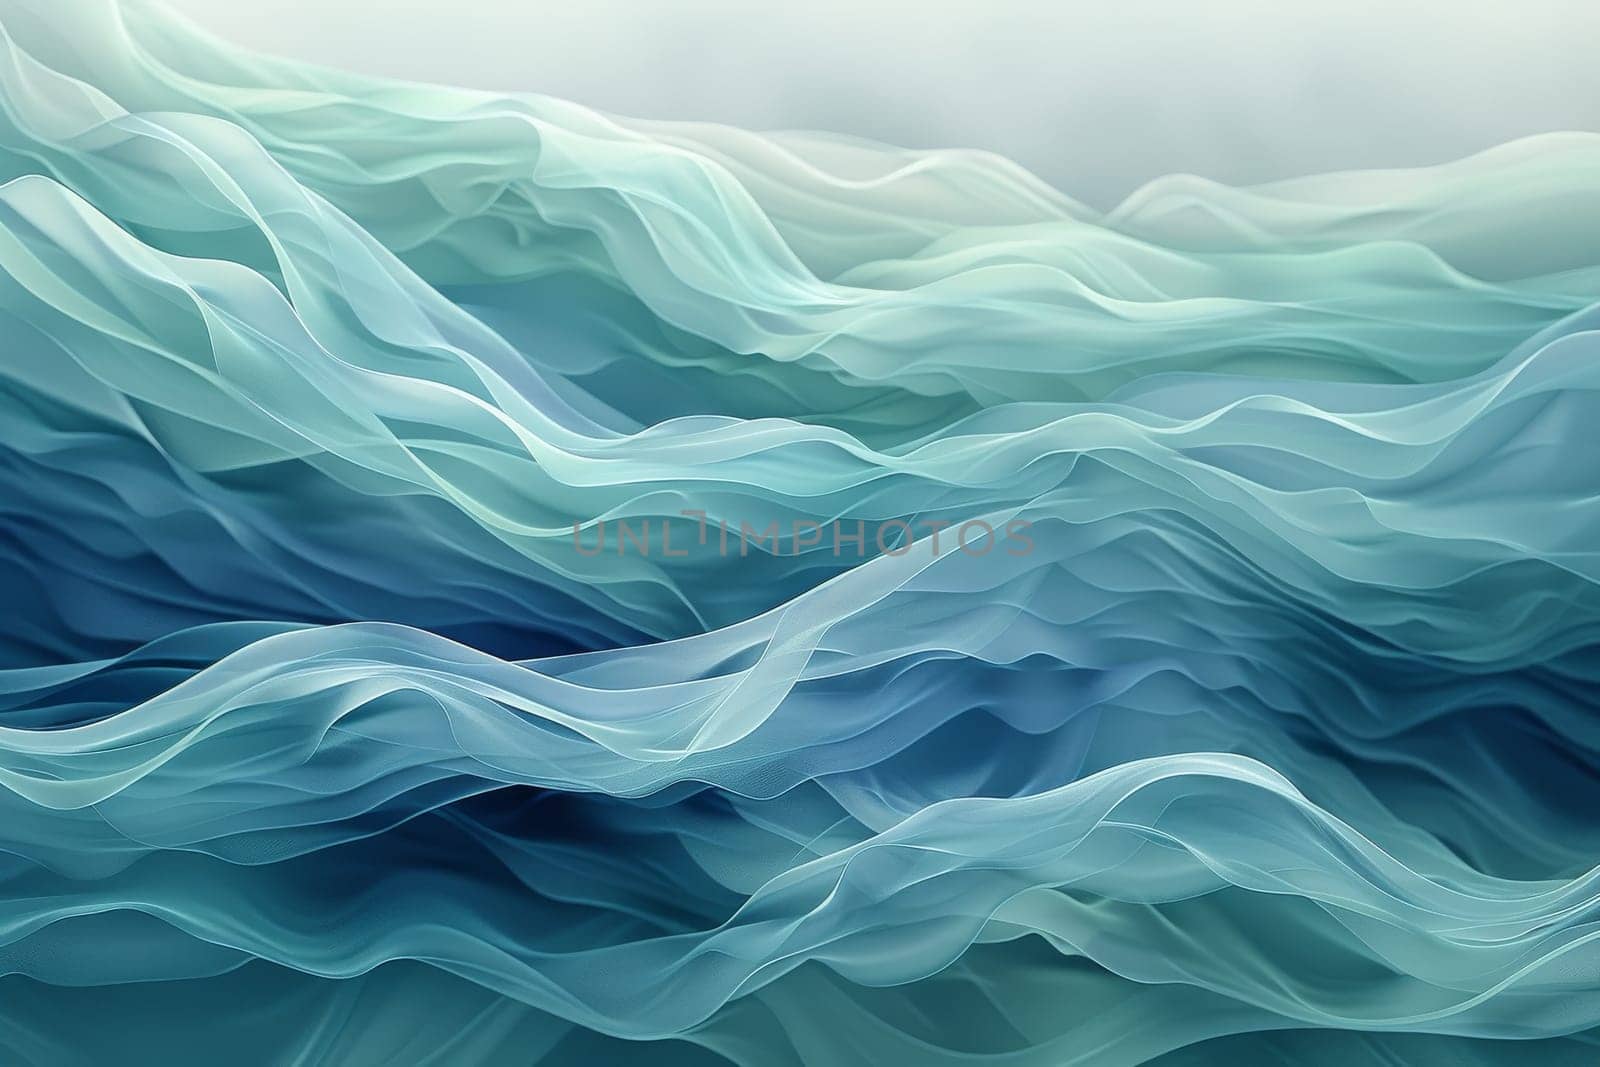 A painting of a body of water with waves and gold. Background by itchaznong